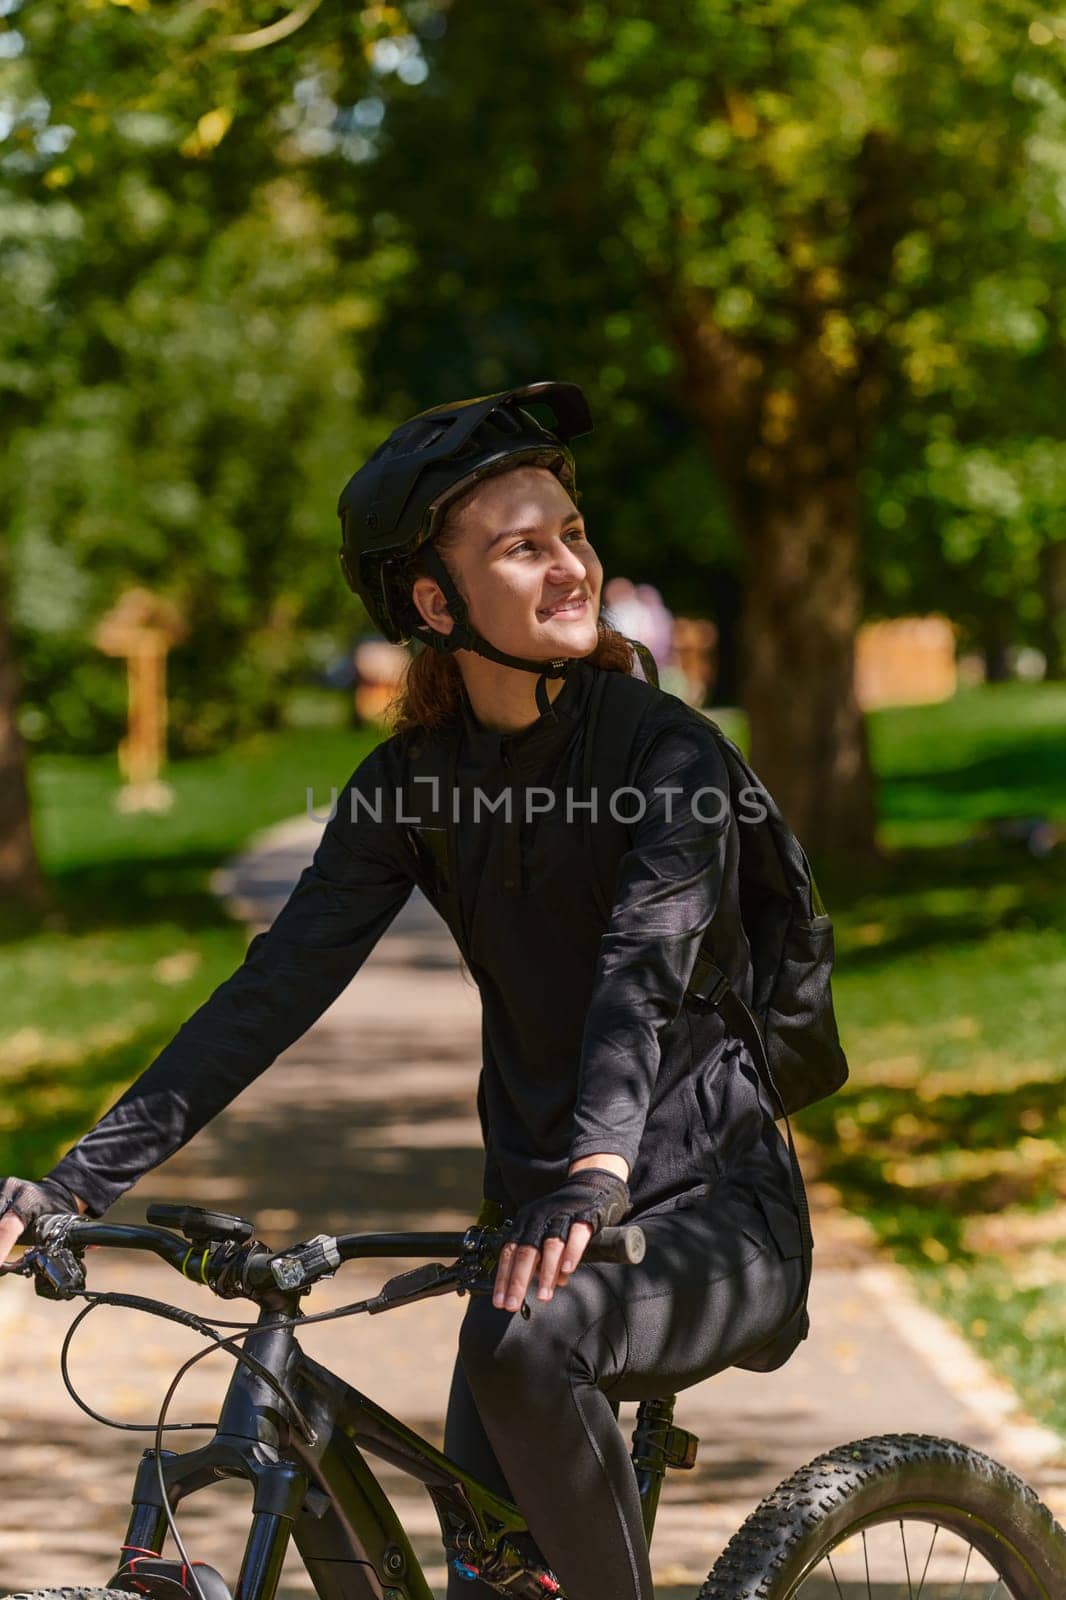 In the radiant embrace of a sunny day, a modern woman revels in the joy of cycling, her sleek bicycle and professional gear complementing her active lifestyle as she rides through the park, epitomizing a perfect blend of style and outdoor vitality by dotshock